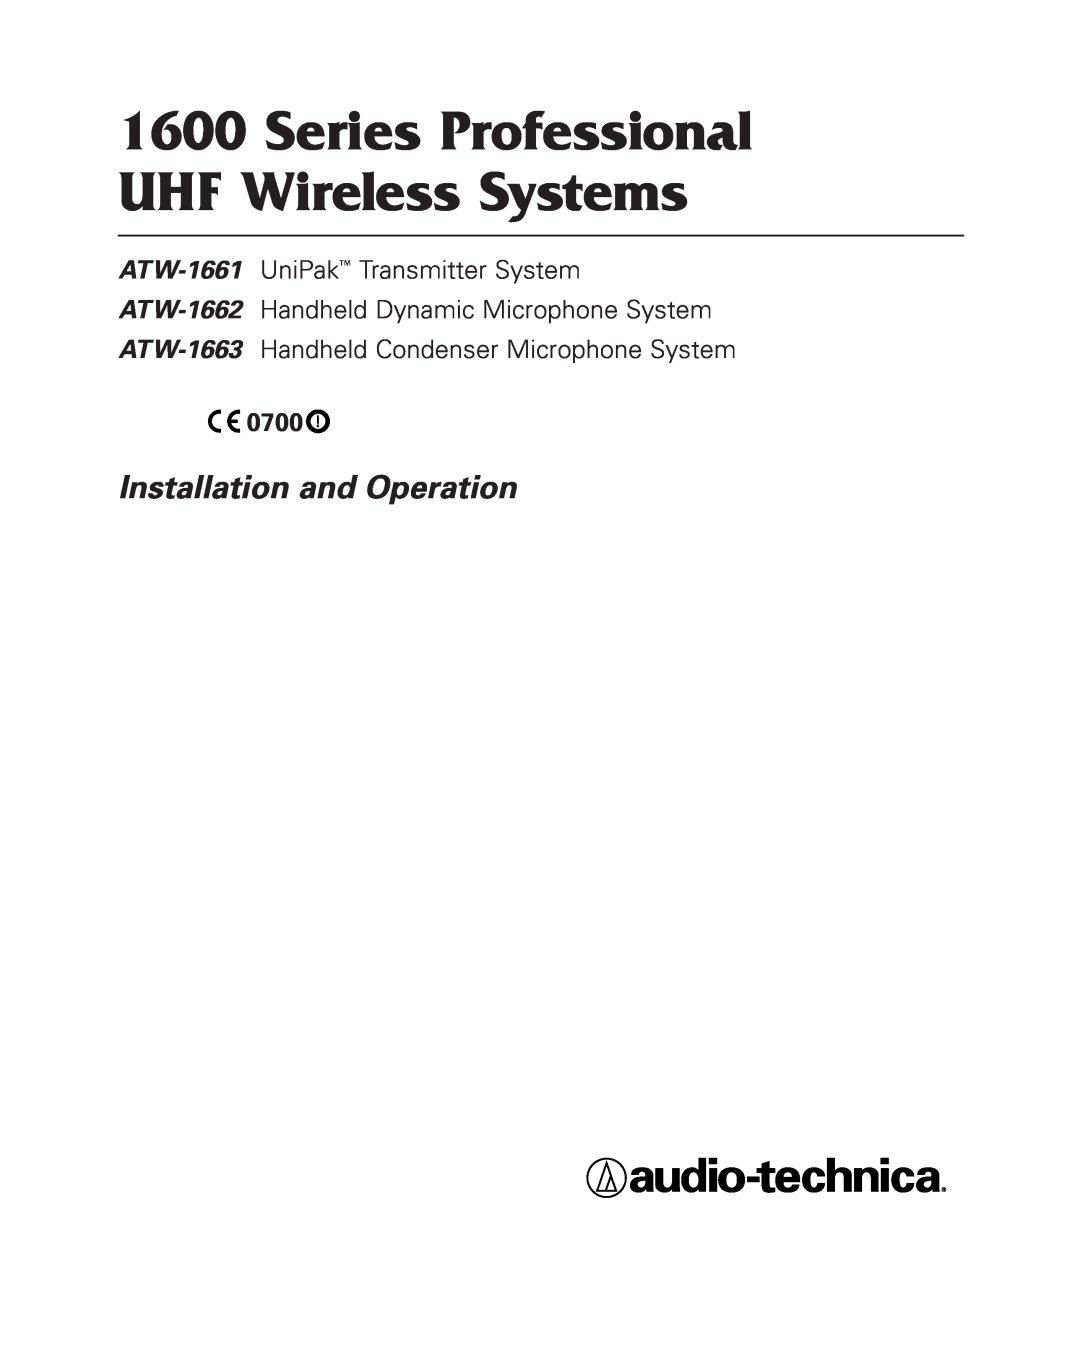 Audio-Technica uhf wireless systems manual Installation and Operation, 0700, Series Professional UHF Wireless Systems 